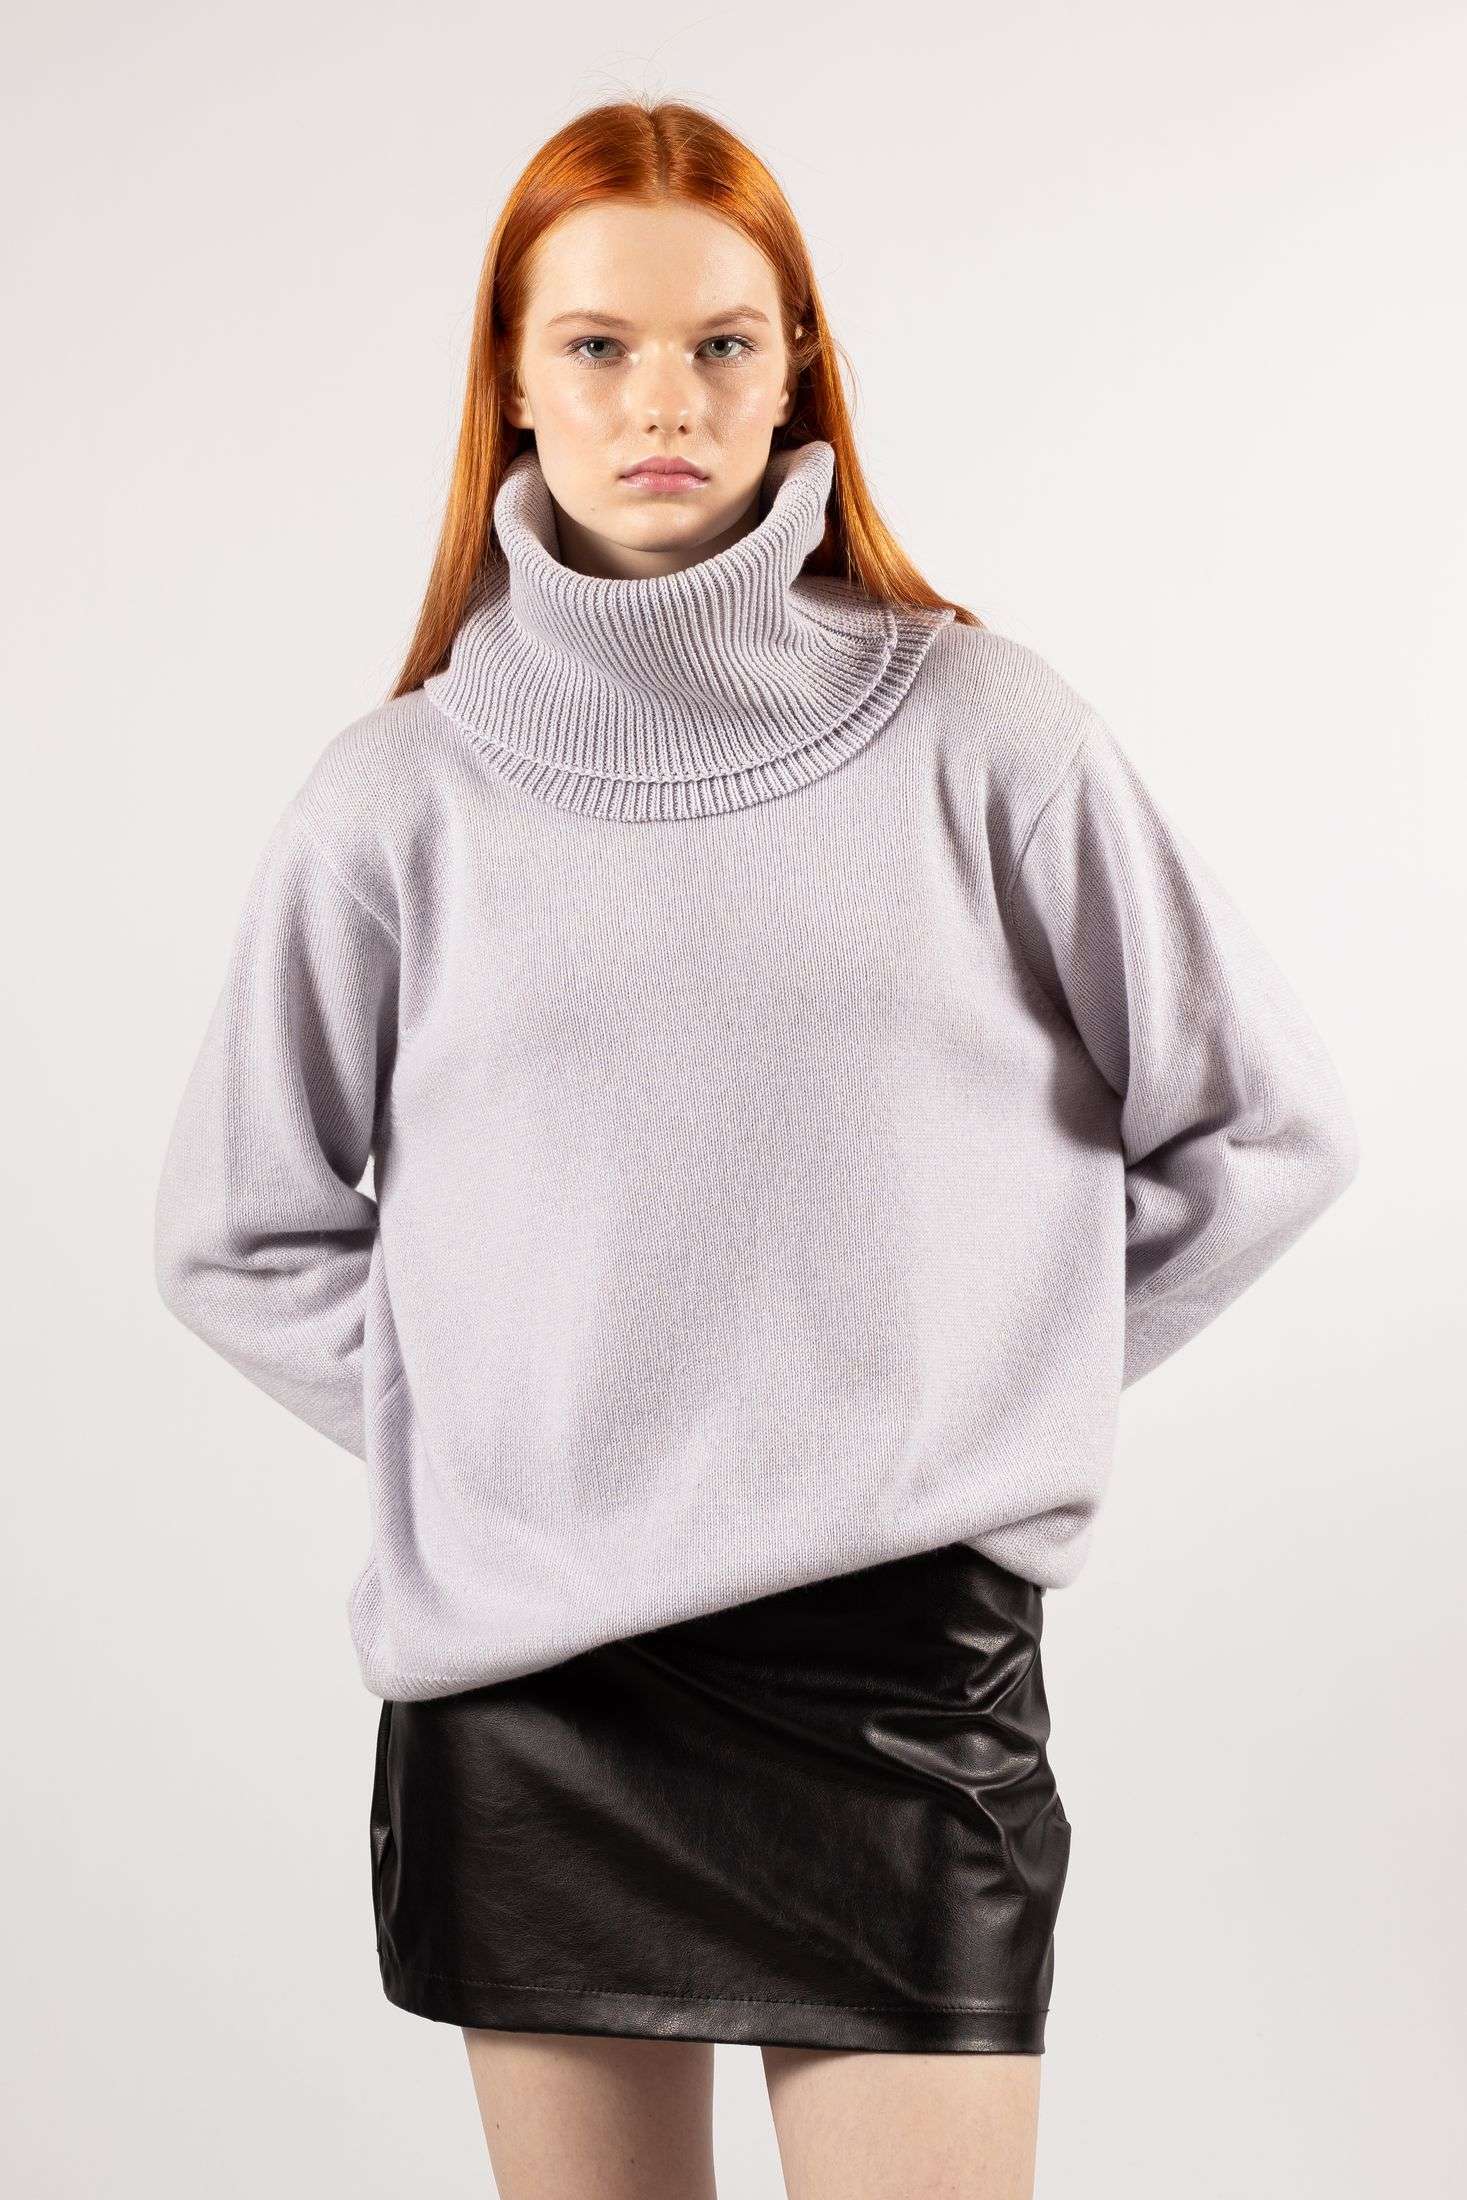 Discover the trendy Frida Blue knit sweater in a soothing pale blue shade.